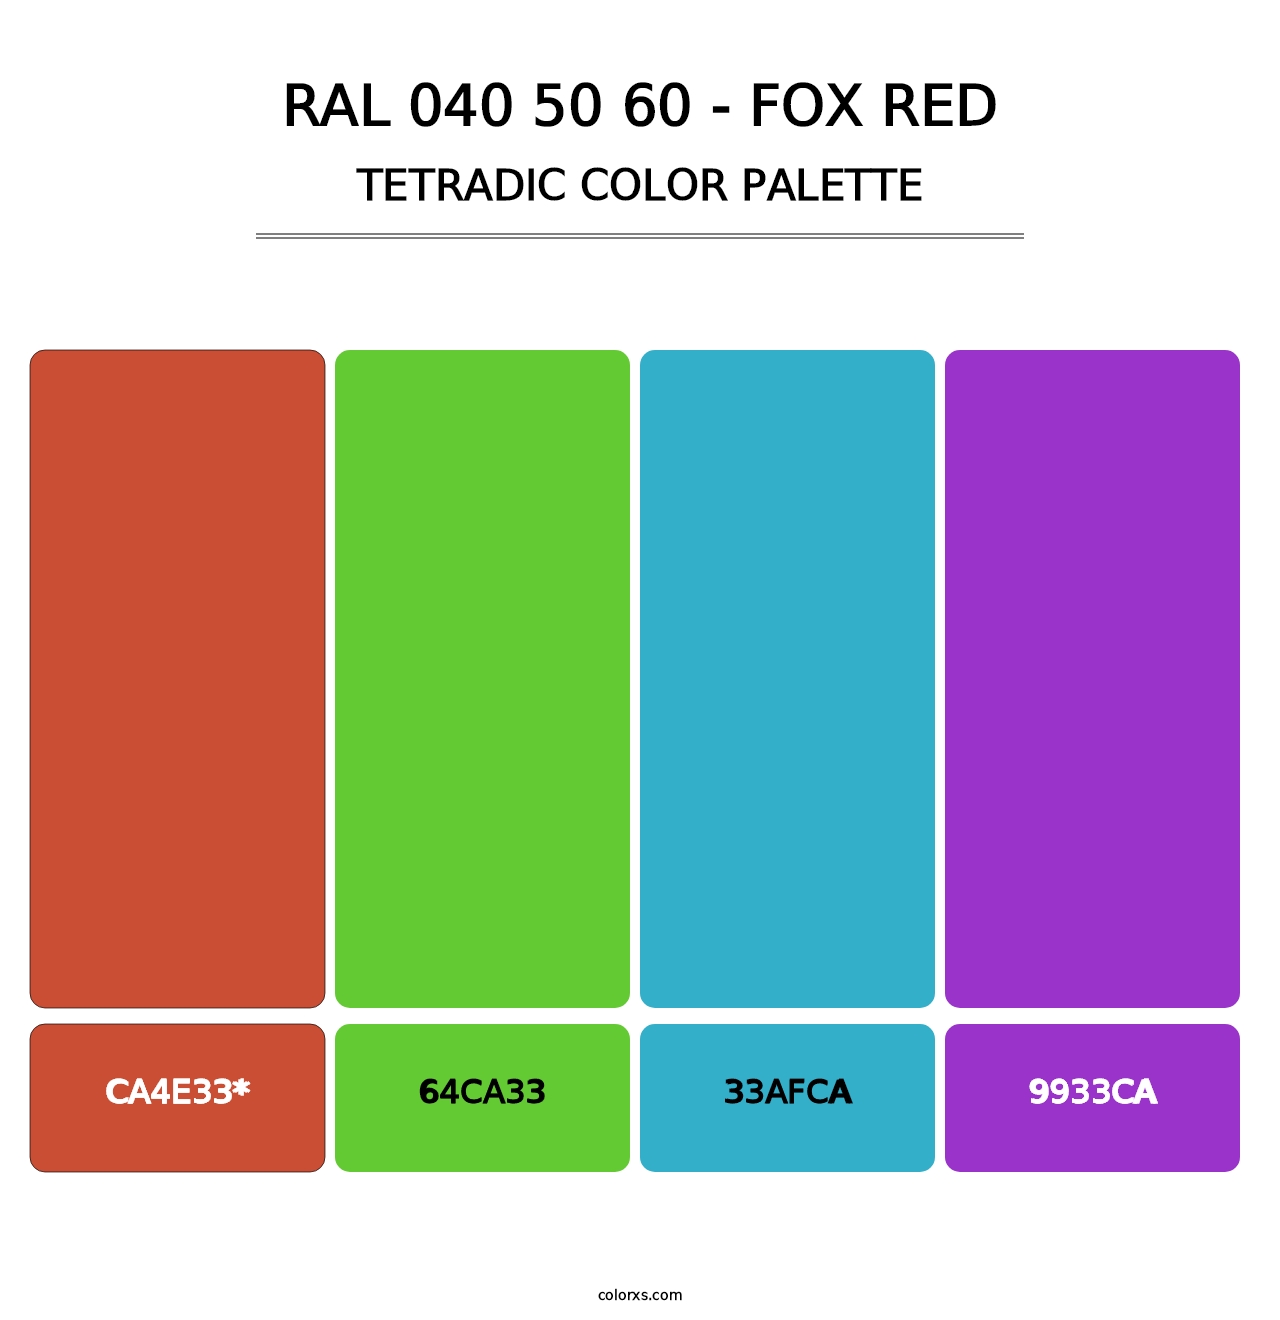 RAL 040 50 60 - Fox Red - Tetradic Color Palette